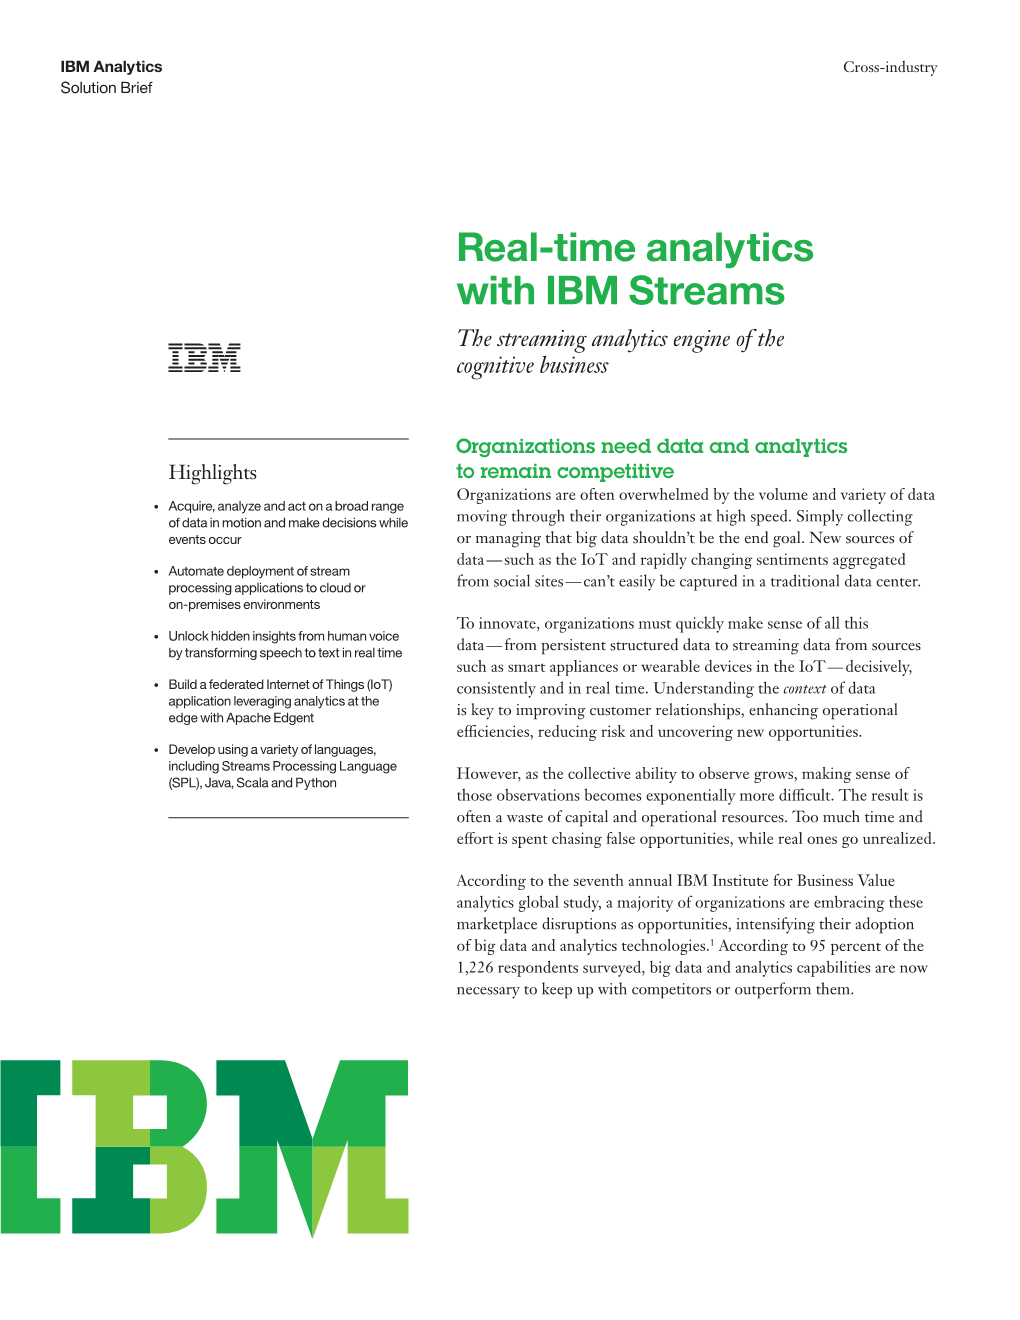 Real-Time Analytics with IBM Streams the Streaming Analytics Engine of the Cognitive Business